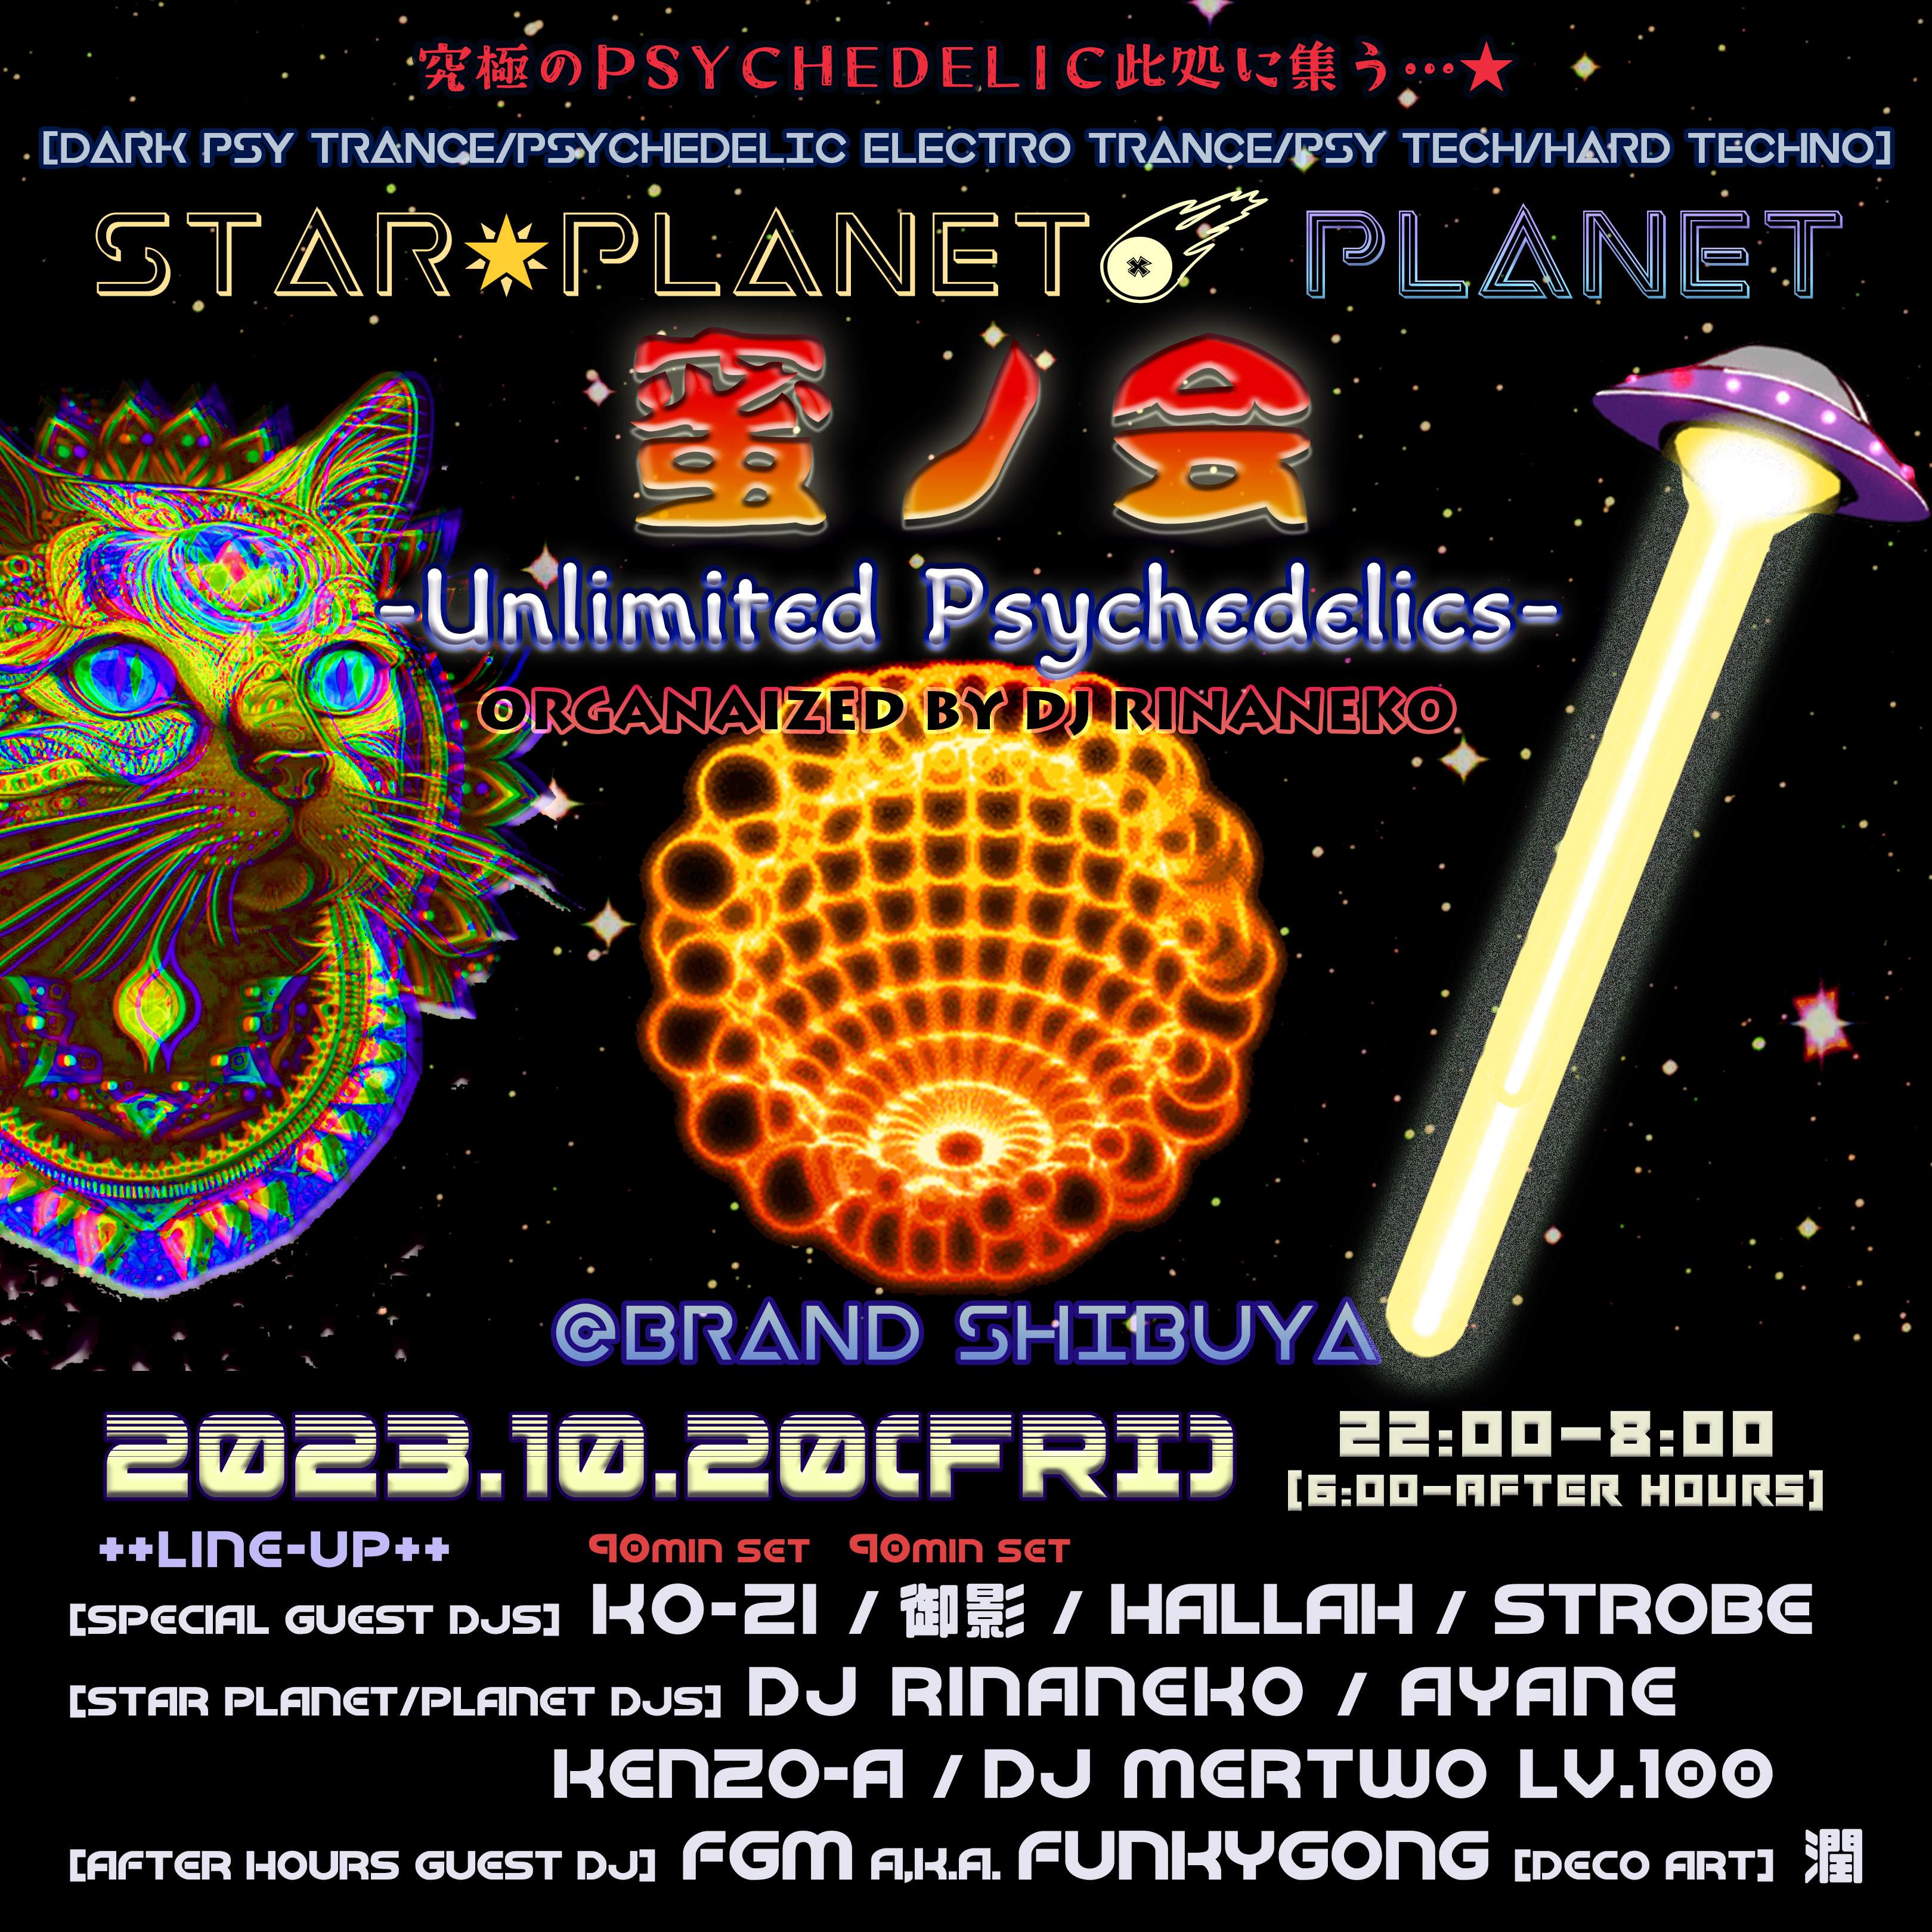 STAR☆PLANET x￼ PLANET 【蜜ノ会 - Umlimted Psychedelics-】 - フライヤー表